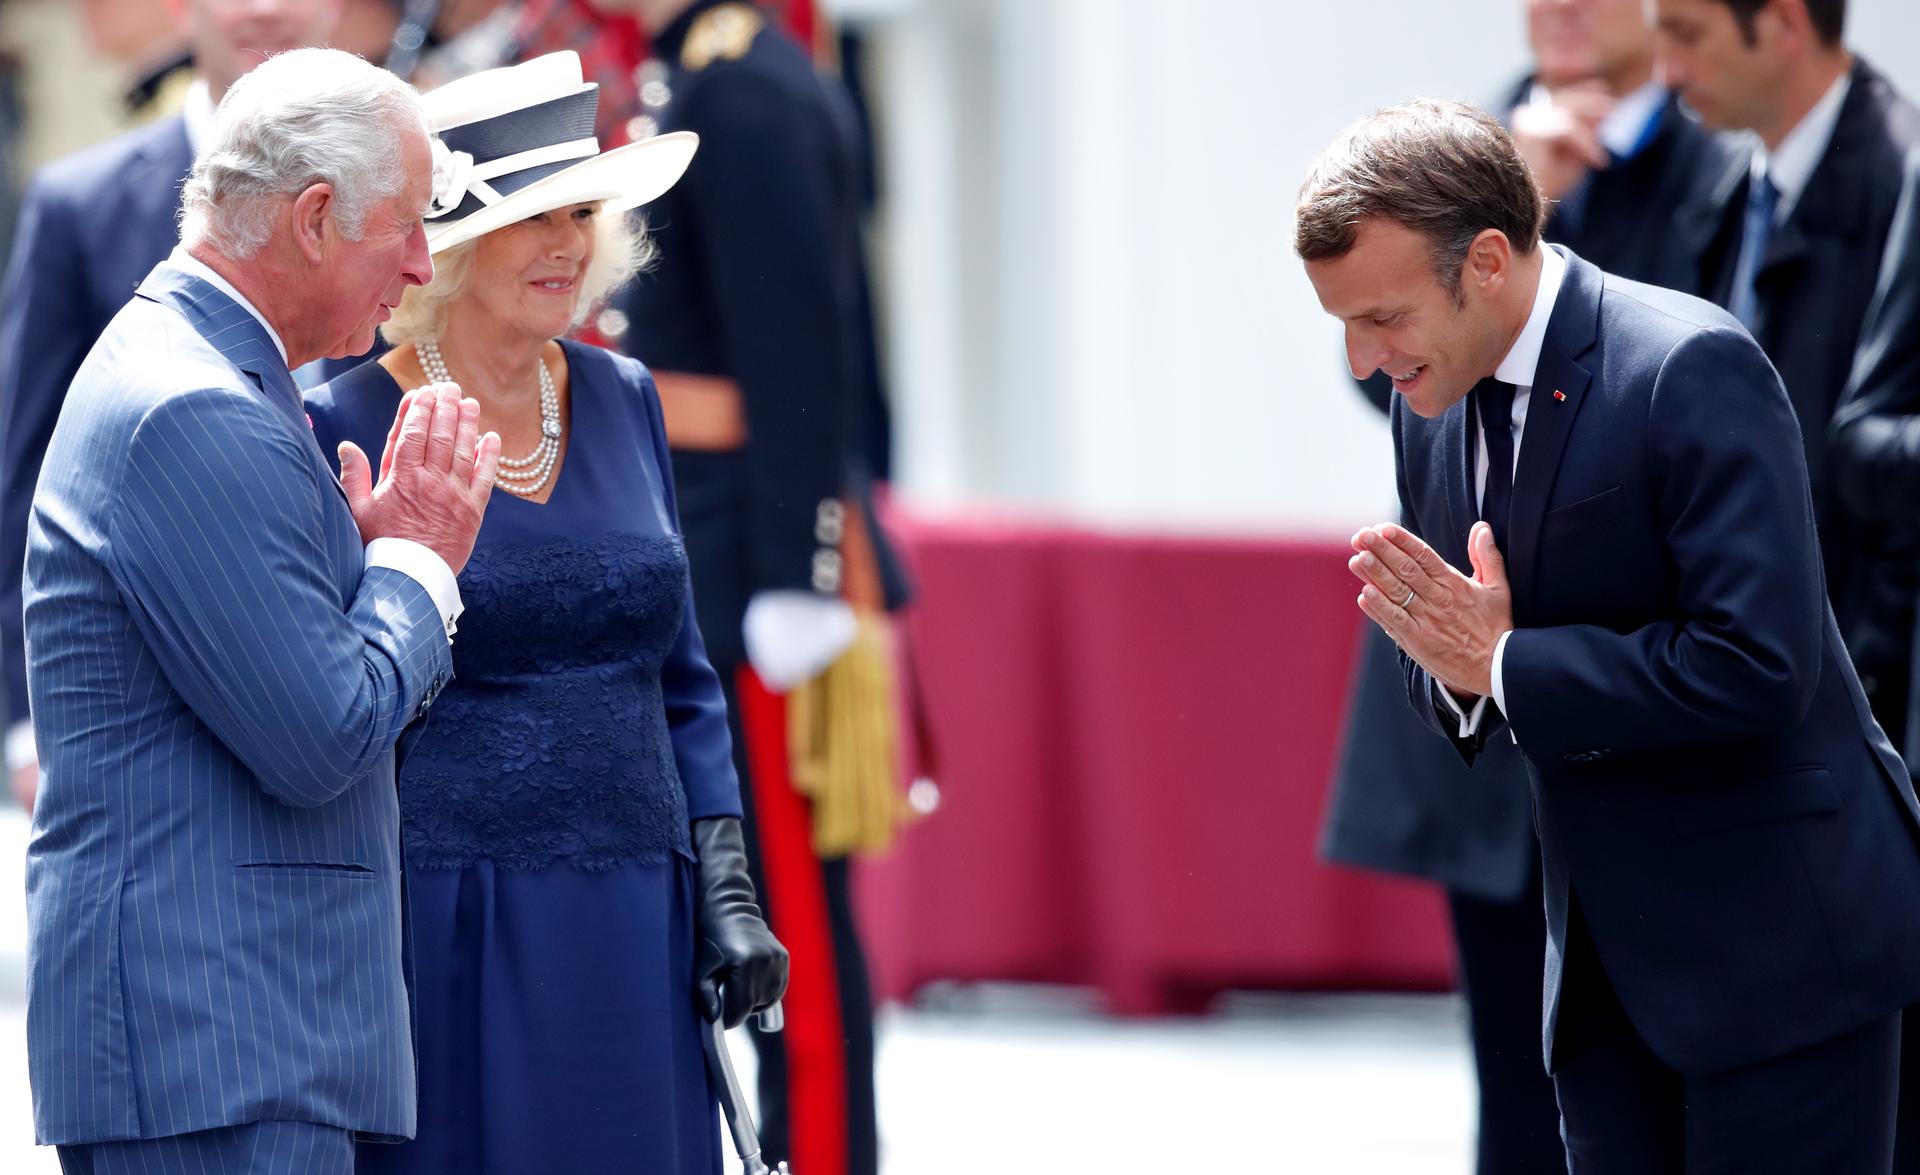 Prince Charles, the Duchess of Cornwall, and Emmanuel Macron greet each other with a 'namaste' on an airport tarmac